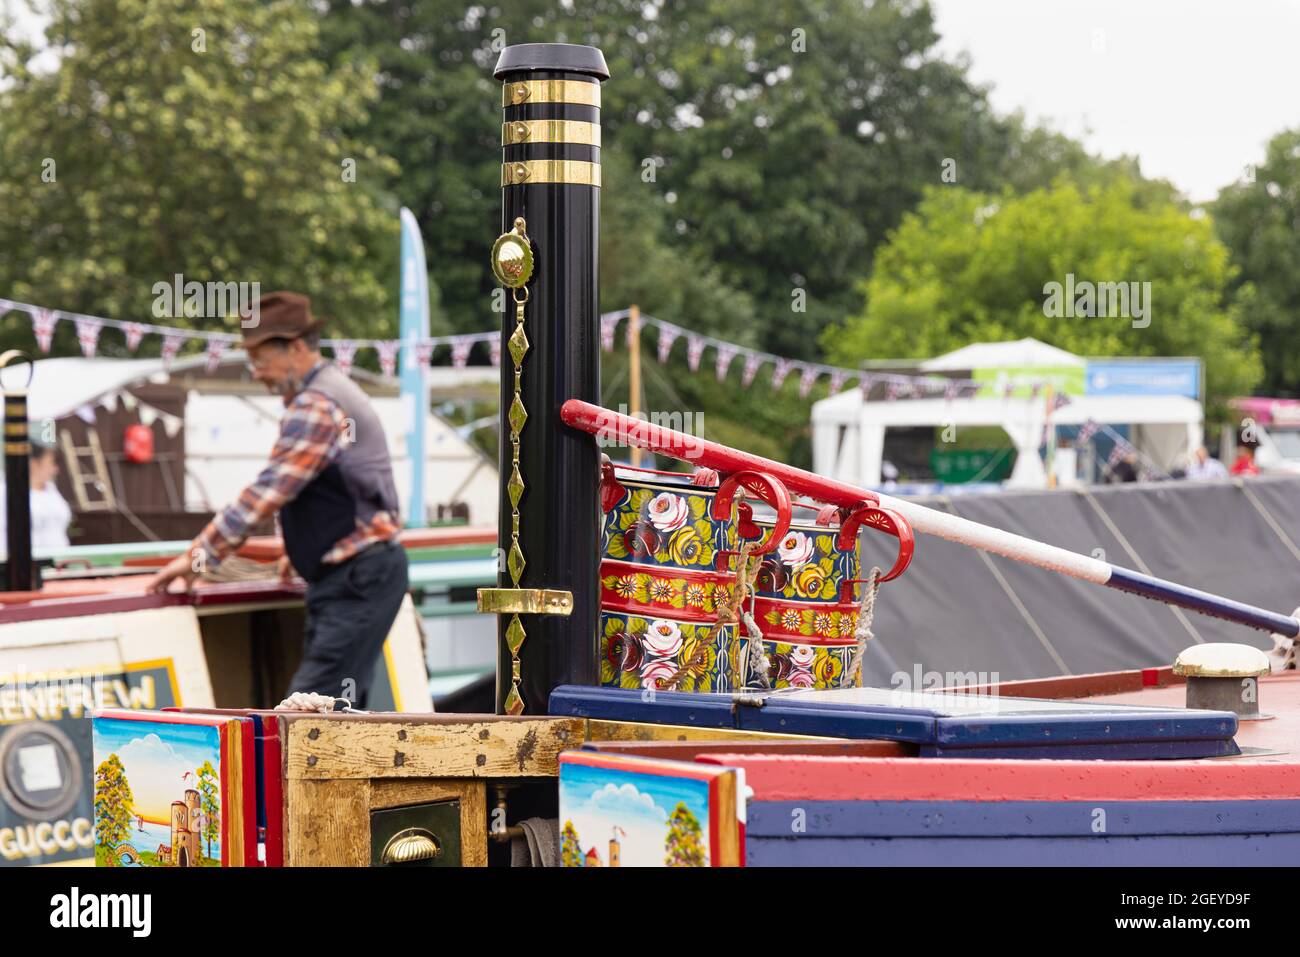 Crick, Northamptonshire, UK, August 22nd 2021: Traditionally painted jugs by a brass bound chimney on the roof of a narrowboat at Crick Boatshow. Stock Photo